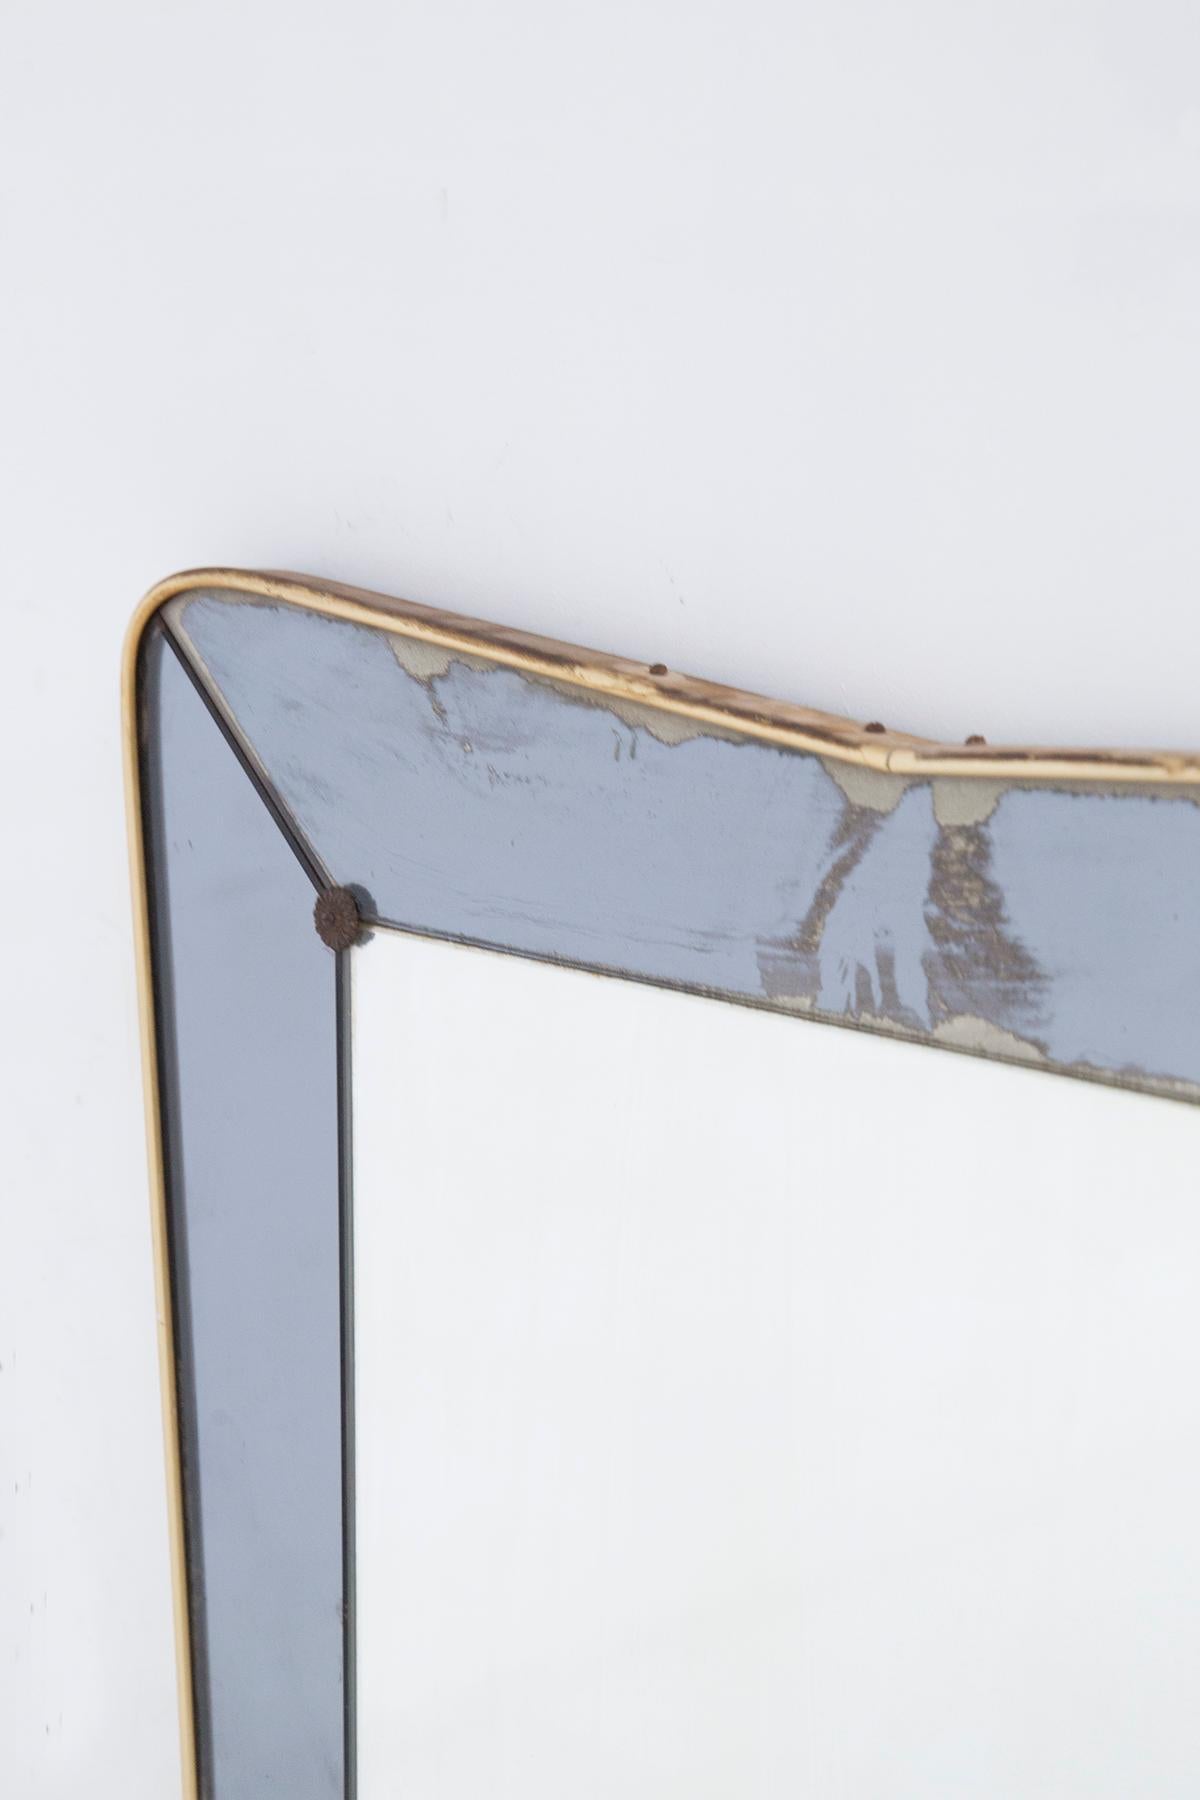 Sweet wall mirror of fine Italian manufacture designed in the 1950s.
The mirror is designed to be a wall mirror, it has a soft rectangular shape with beveled corners that make it softer and more graceful.
The actual mirror has a classic and